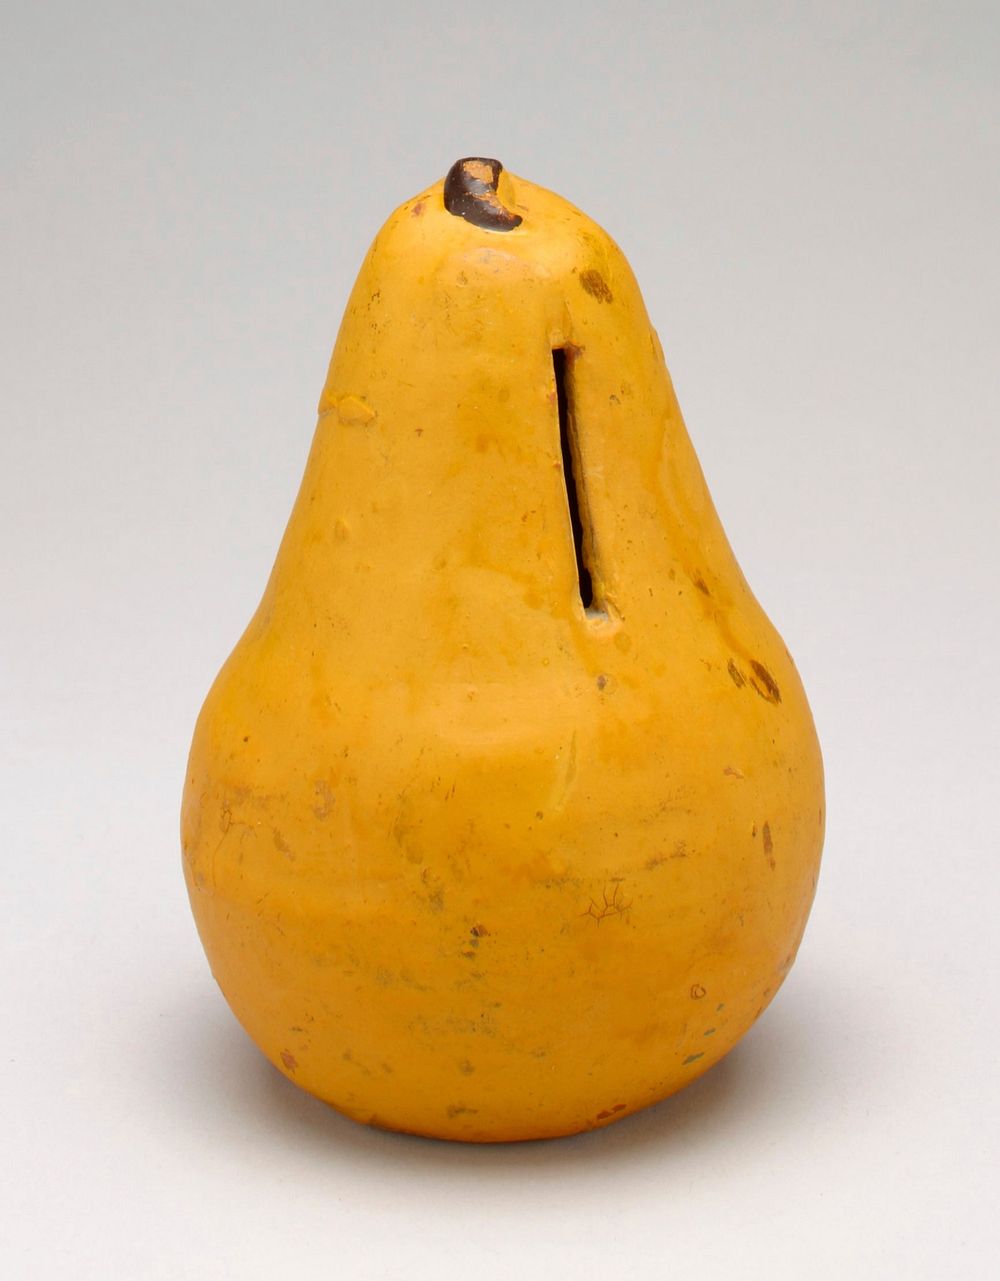 ceramic bank shaped and painted to resemble a yellow pear with brown stem; coin slot in neck of pear. Original from the…